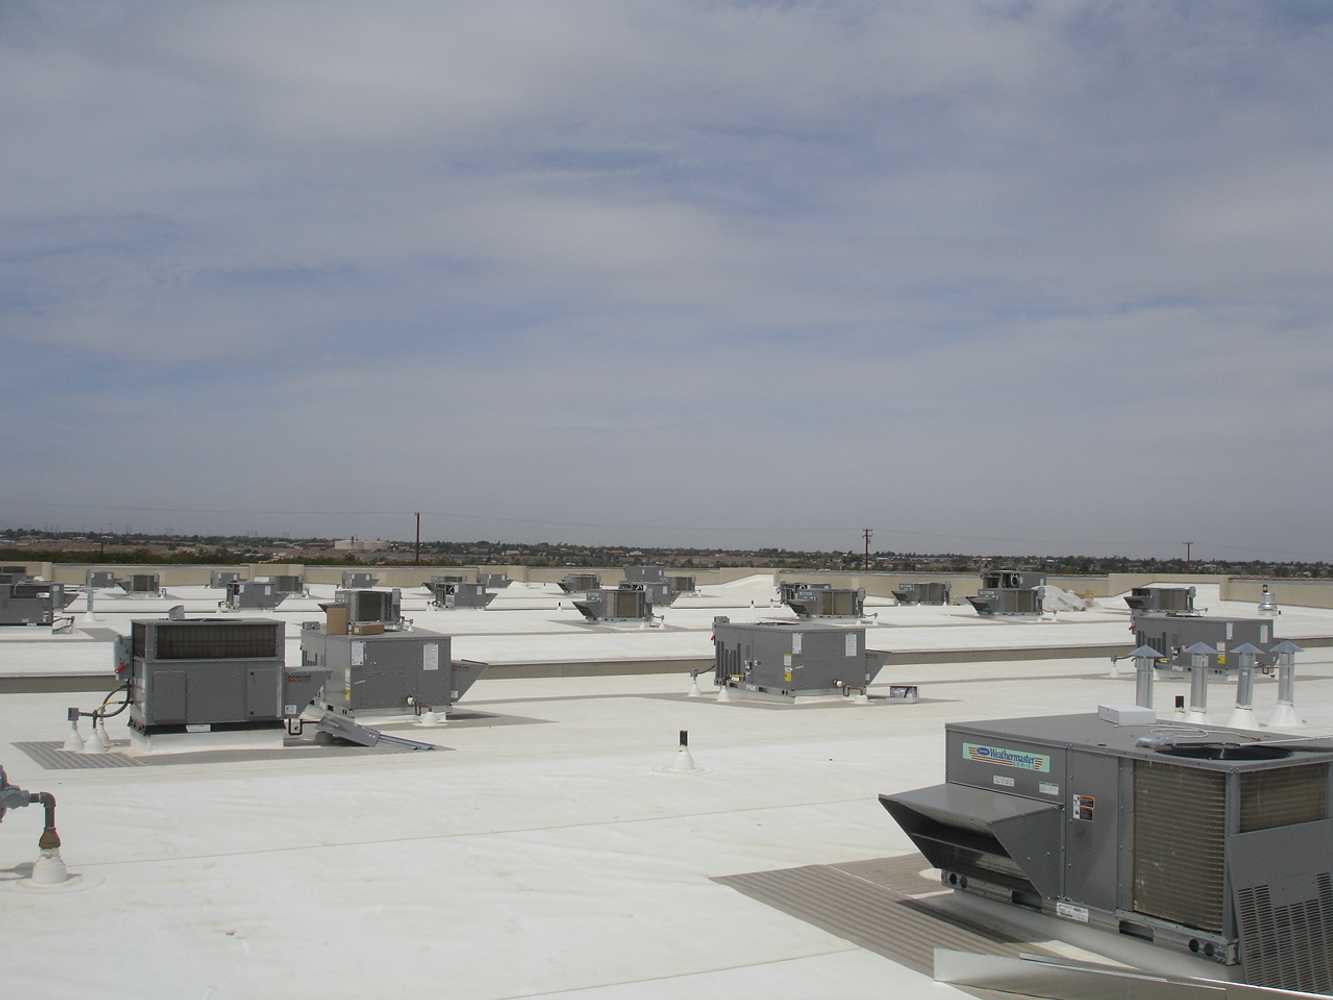 Desert Cooling Inc's projects